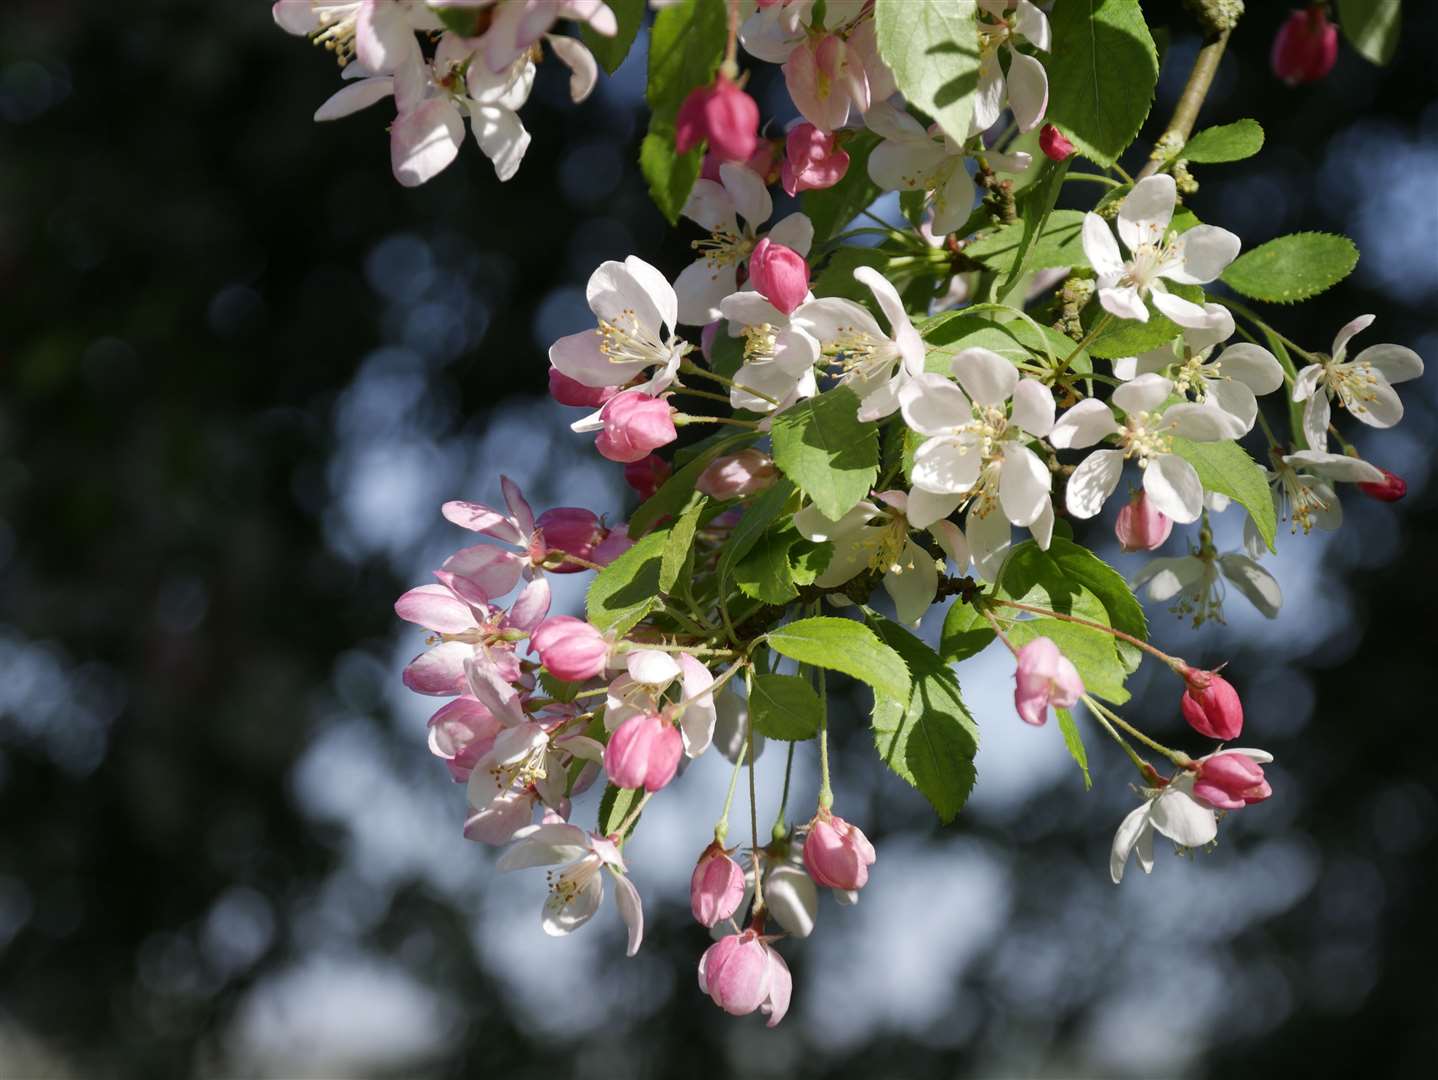 Crab apple blossom in the garden